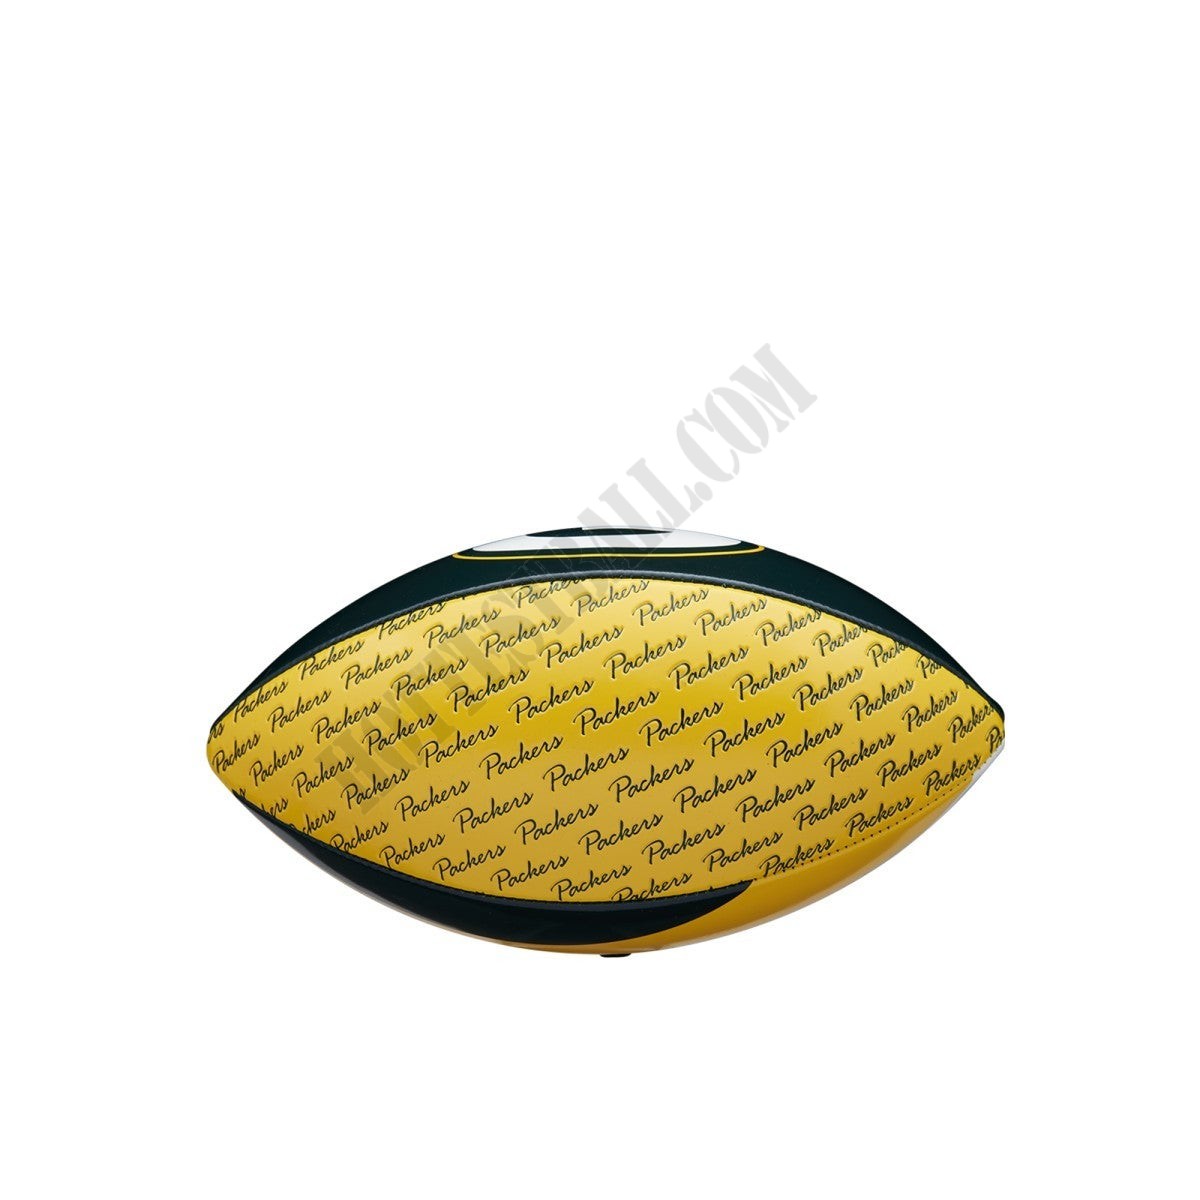 NFL City Pride Football - Green Bay Packers ● Wilson Promotions - -2